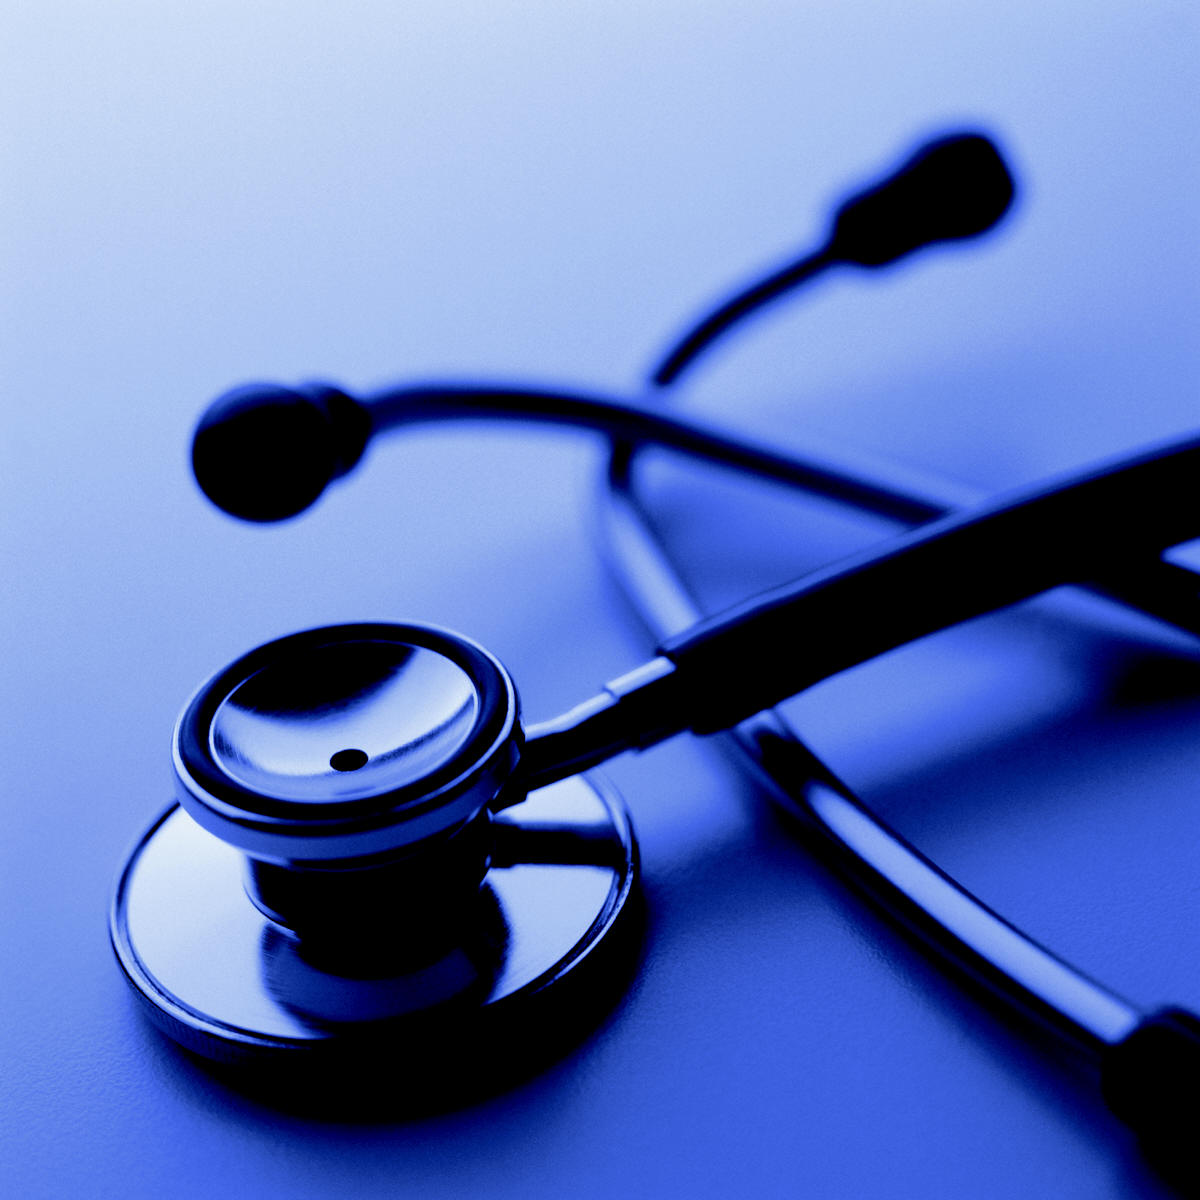 Stethoscope Backgrounds powerpoint backgrounds